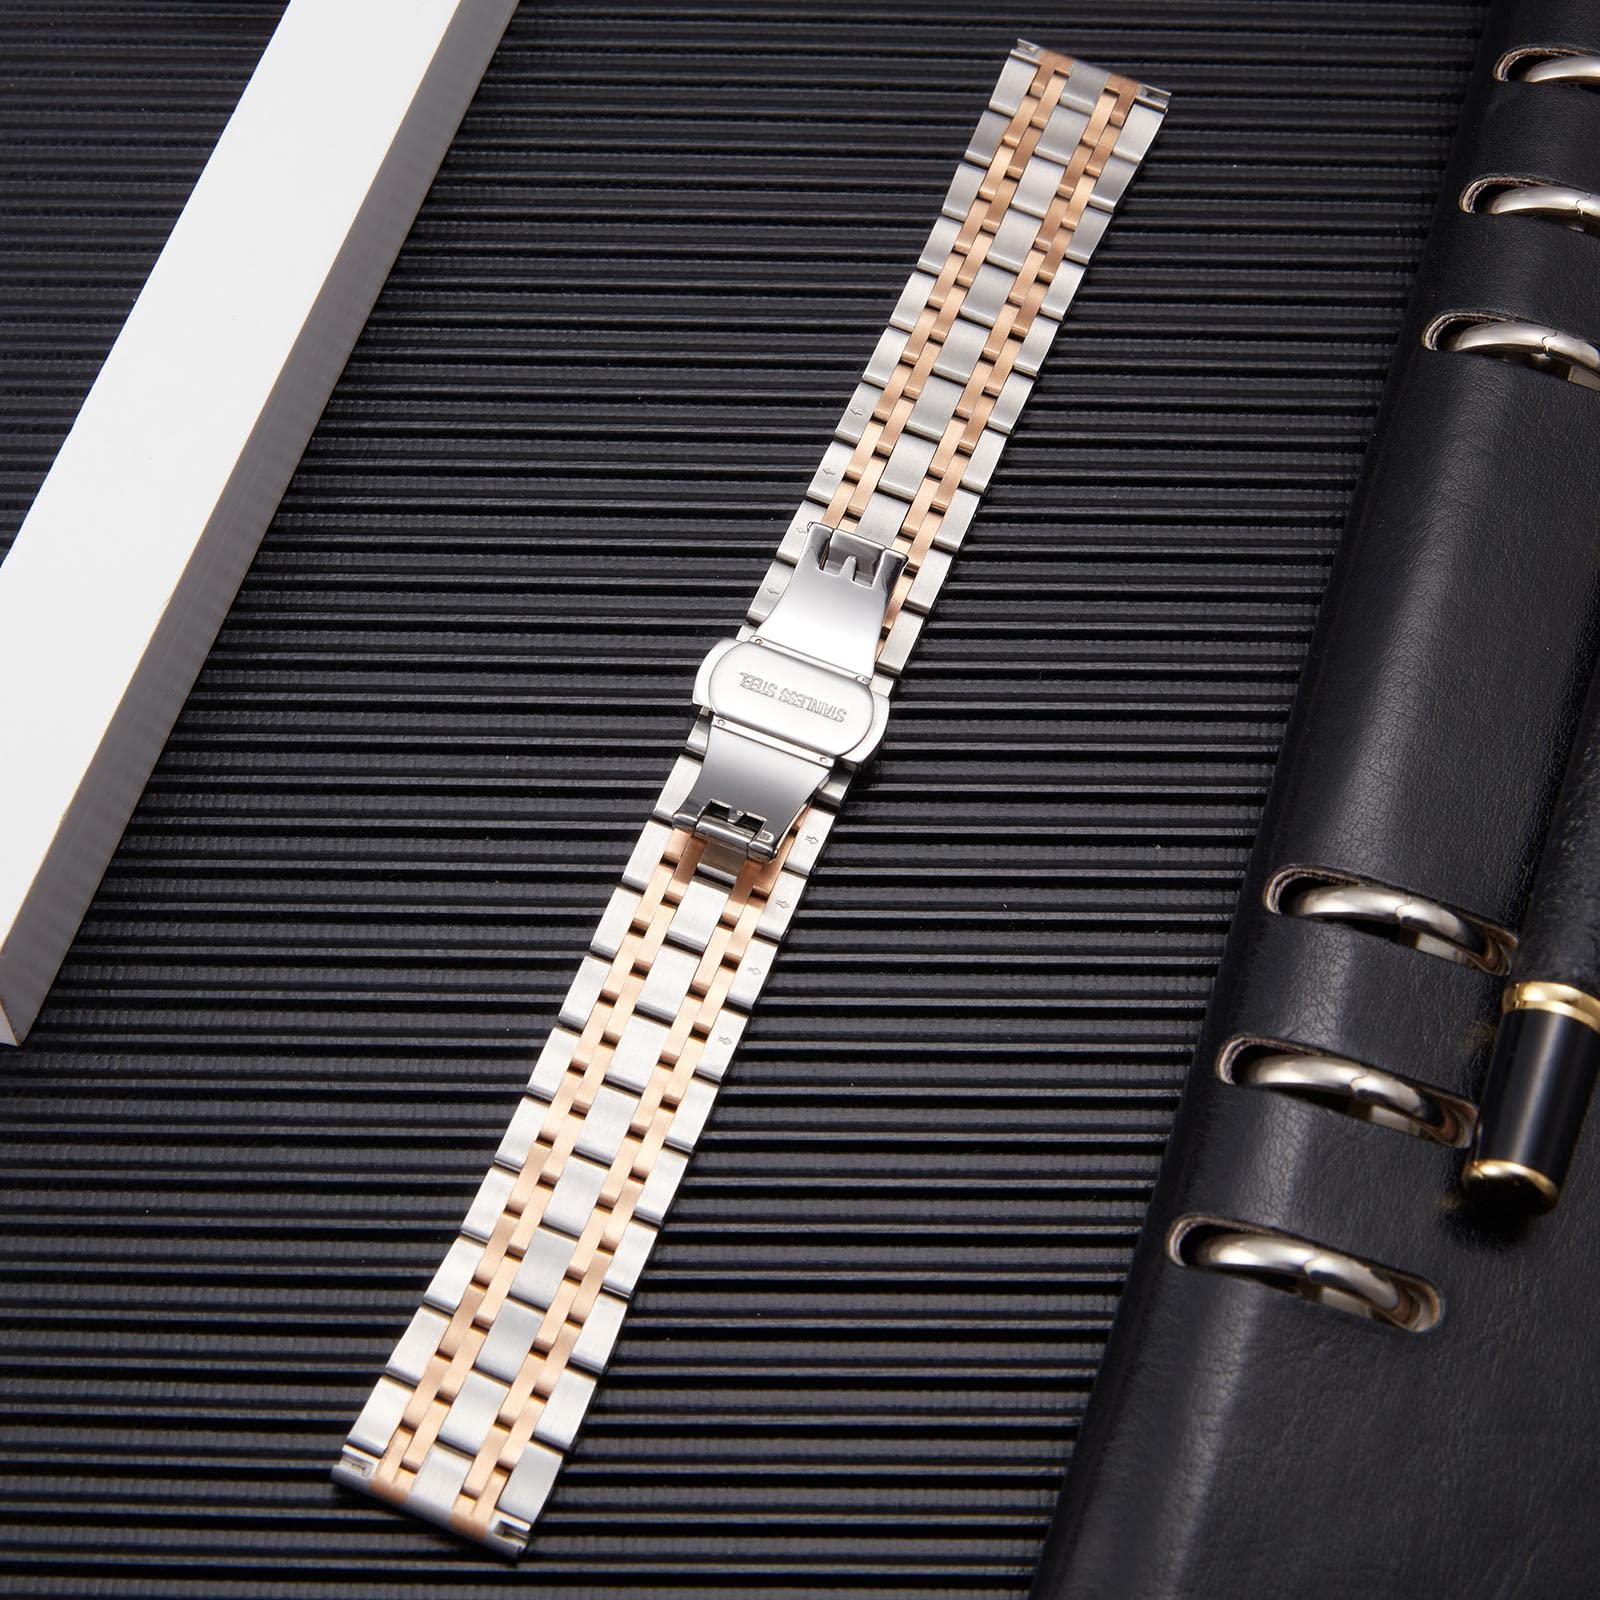 BINLUN Stainless Steel Watch Band High-end Replacement Watch Band 6 Color for Women Men(Gold, Silver, Black, Rose Gold, Gold Tone, Rose Gold Tone) 13 Size (12mm - 24mm)